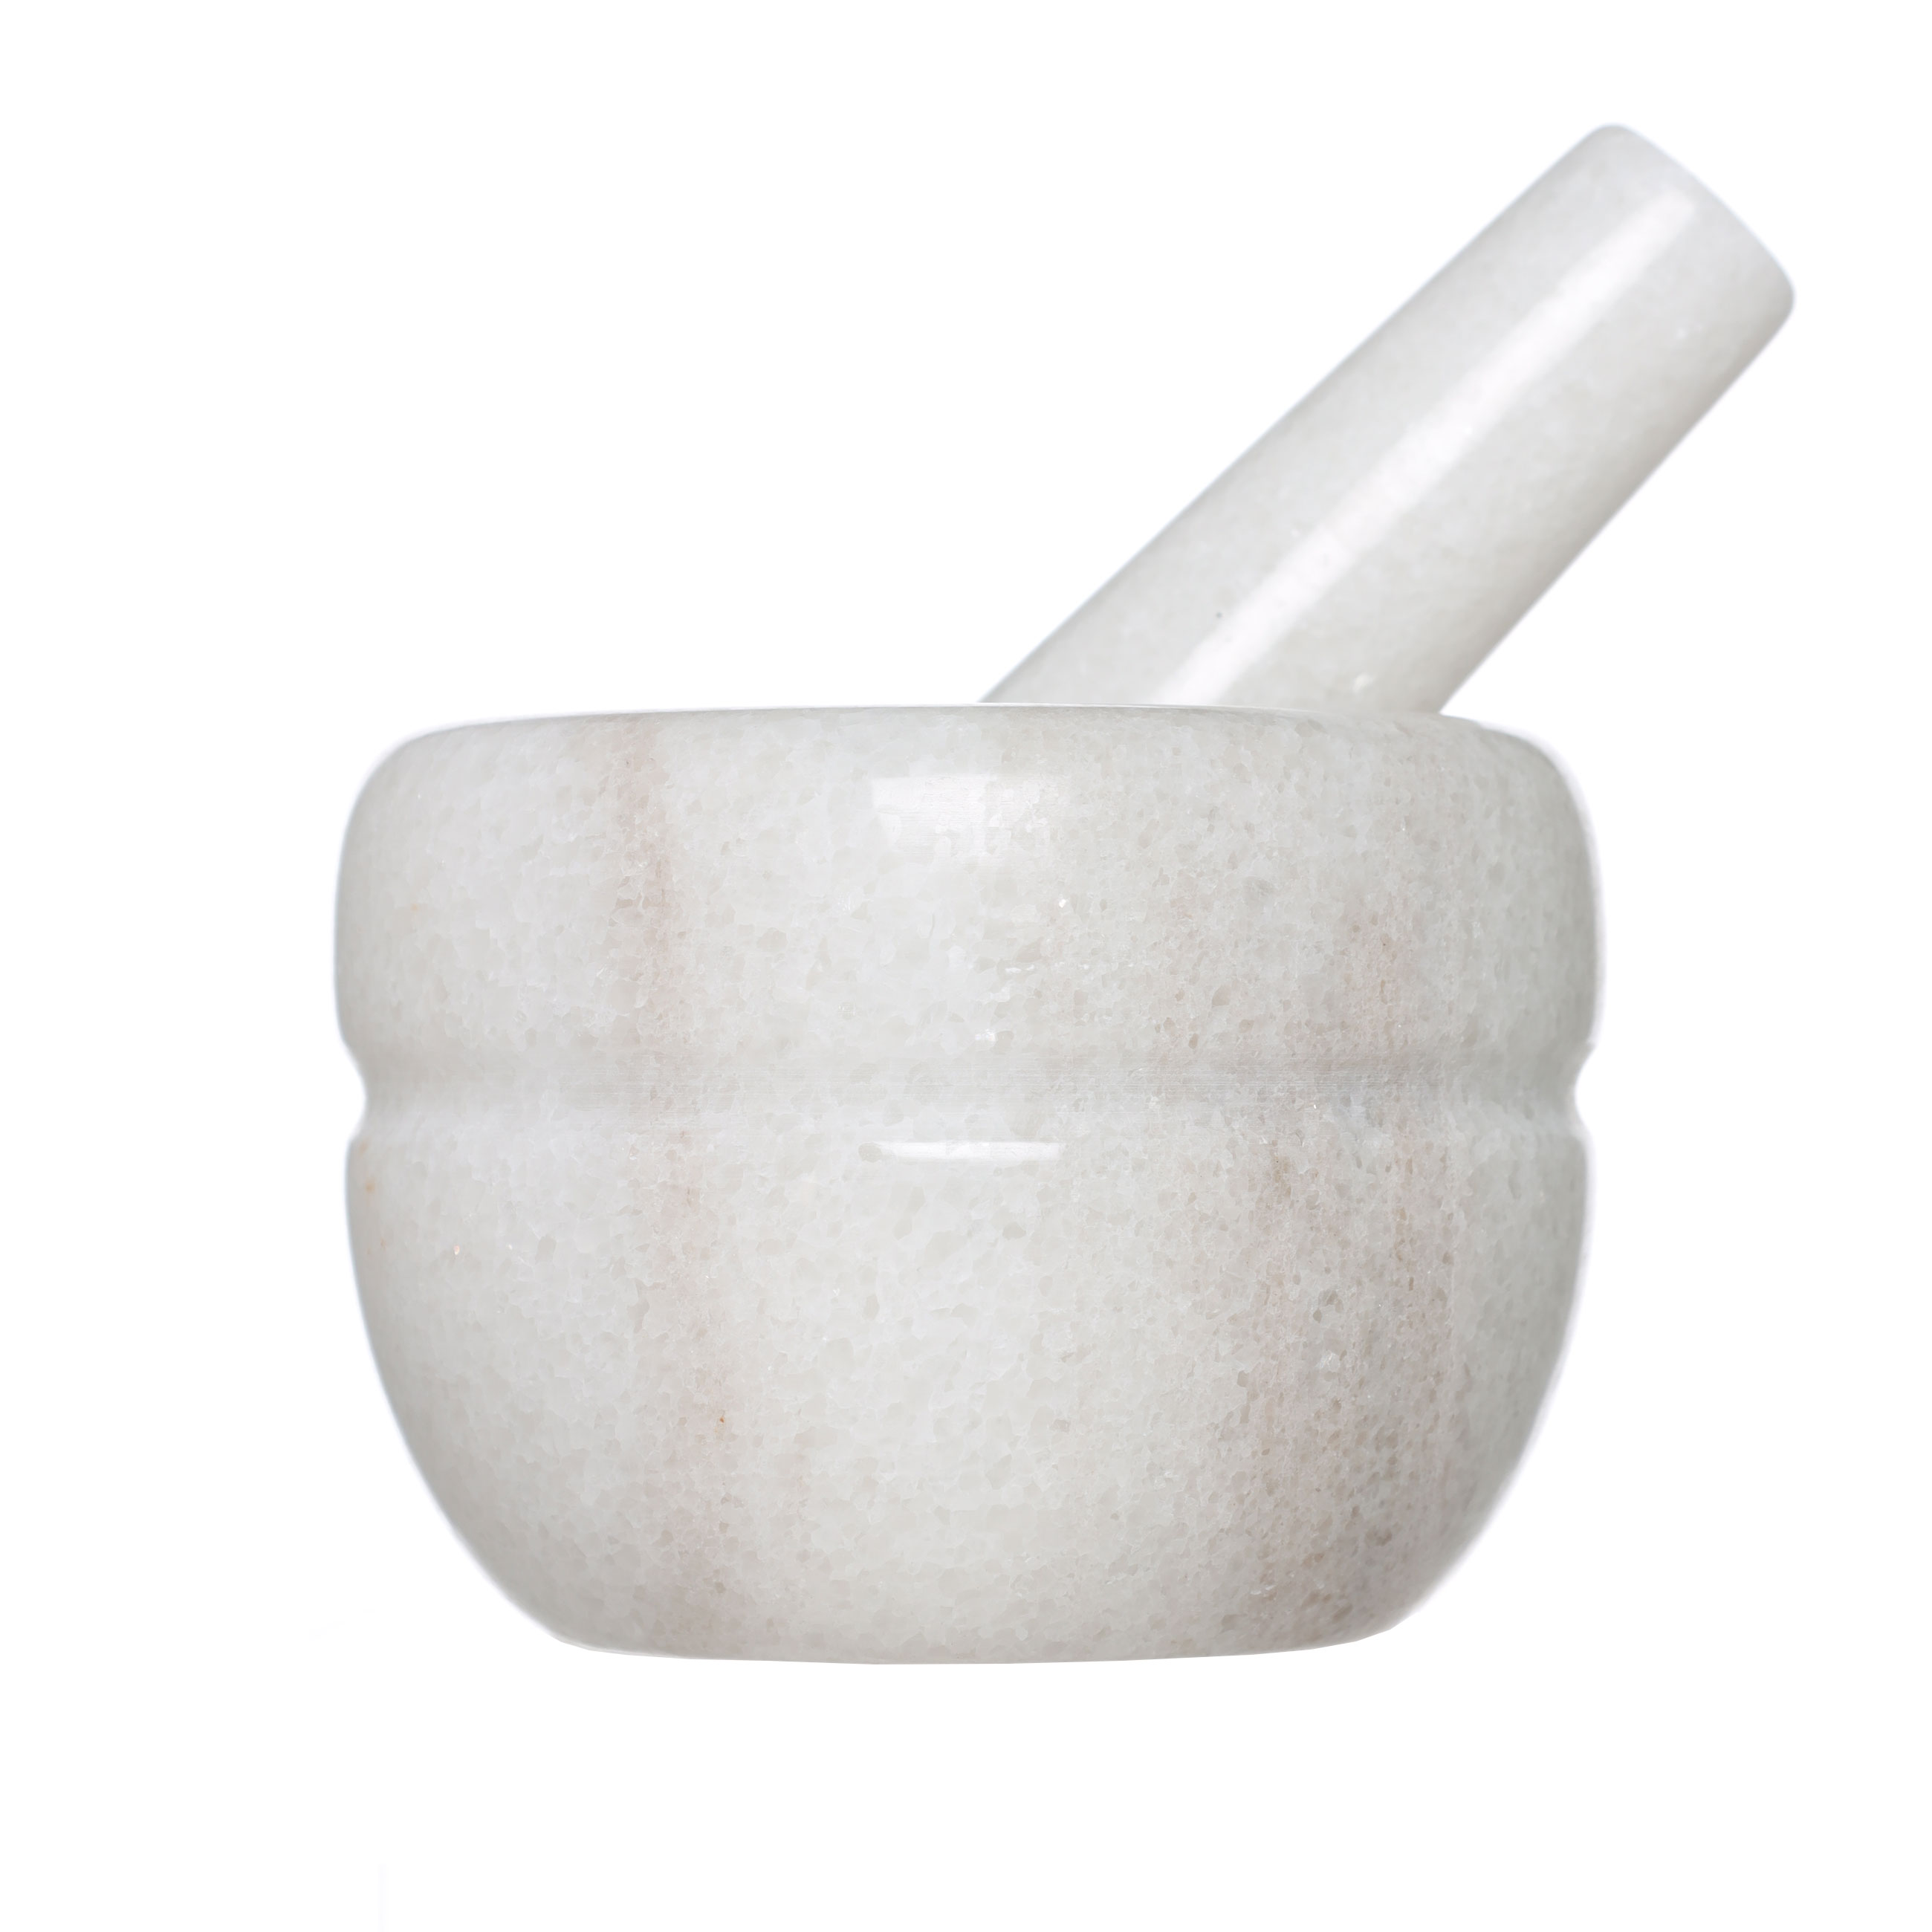 Spice mortar, 10 cm, with pestle, Marble, White, Stripe, Marble изображение № 3